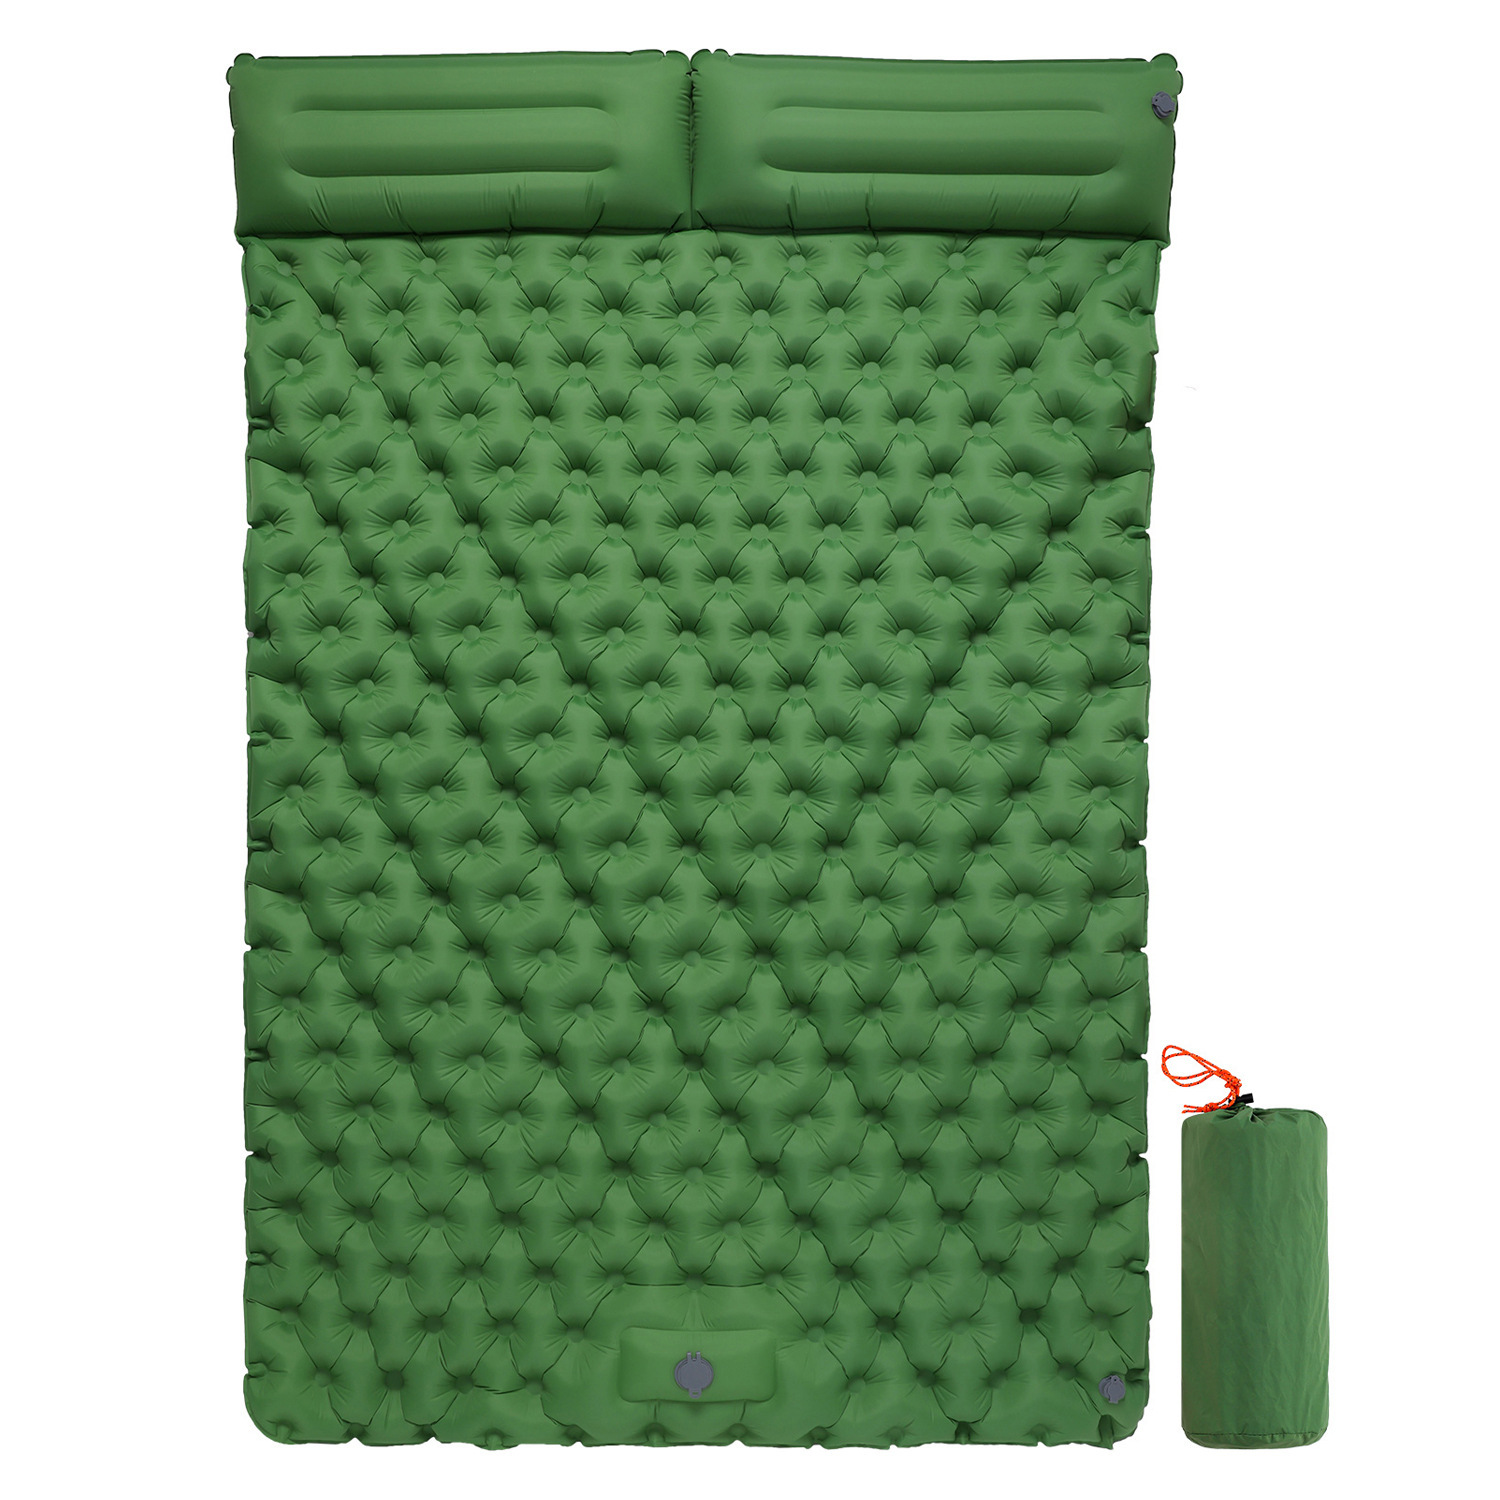 Double inflatable camping mat, widening sleeping pad